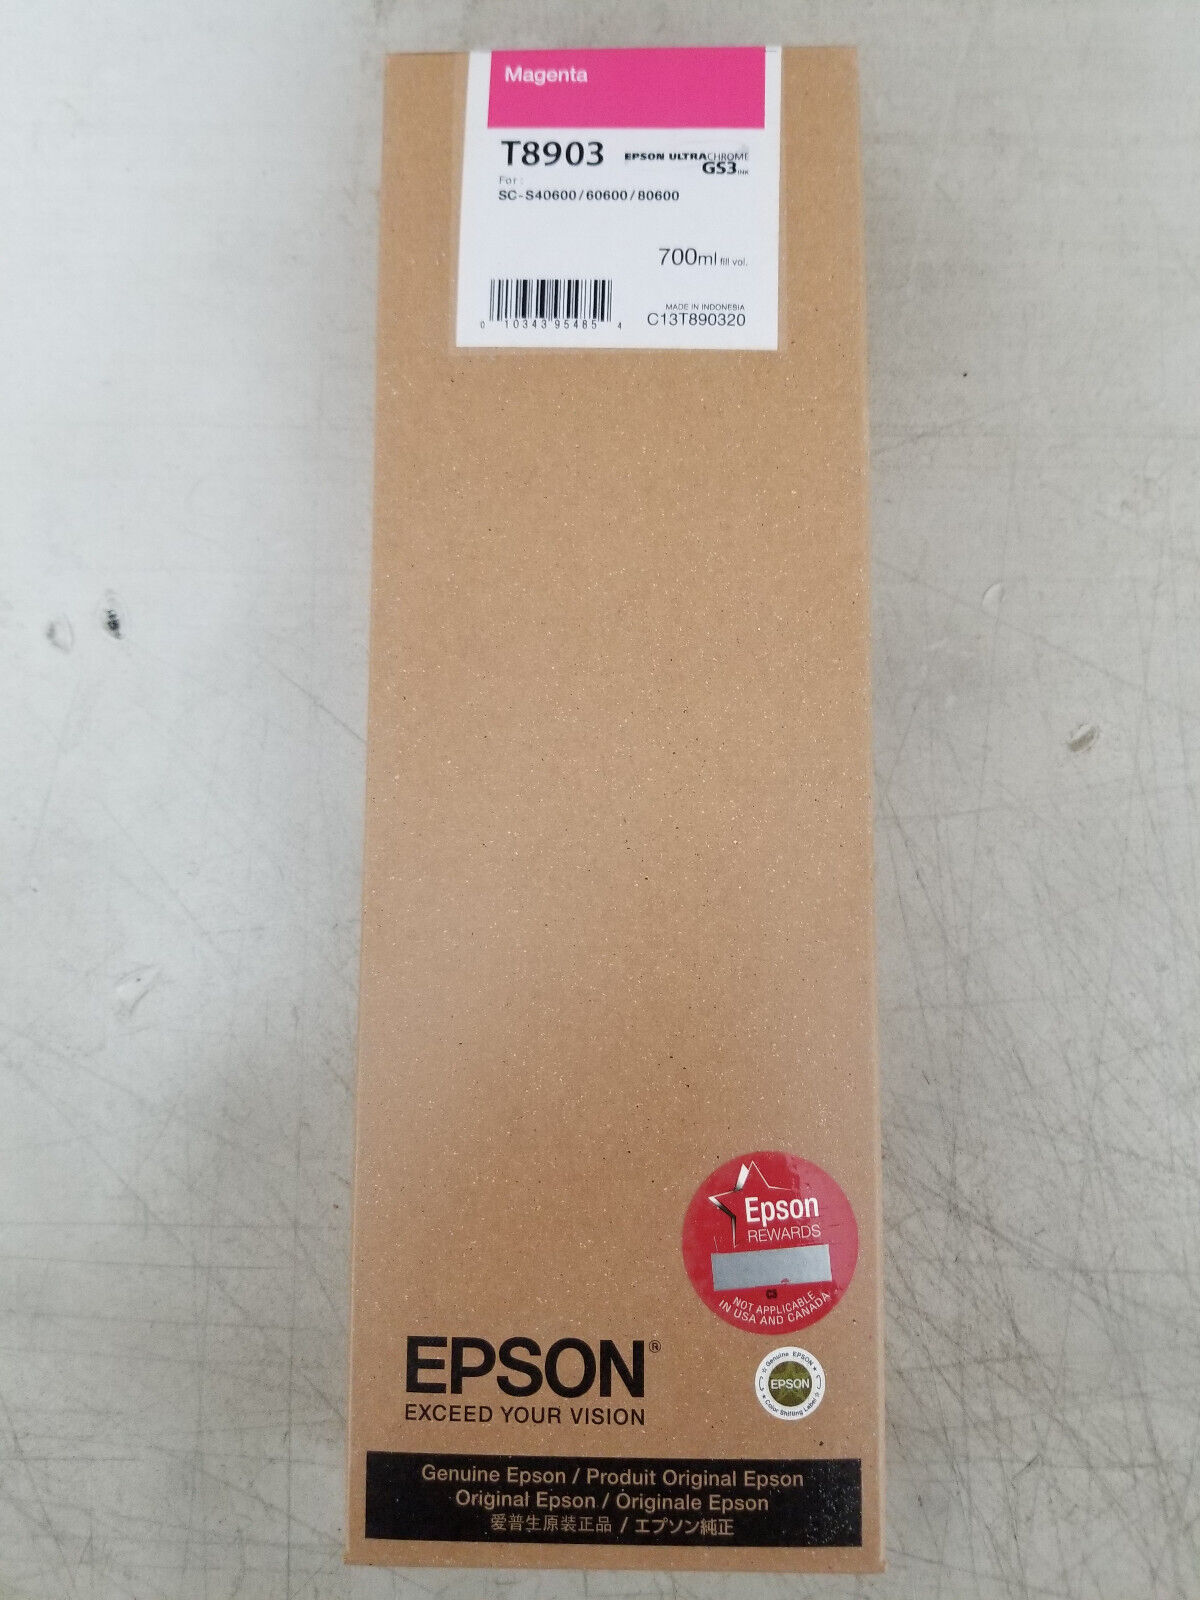 GENUINE Epson GS3 Magenta Ink 700ml (T8903) for S80600, S60600, S40600